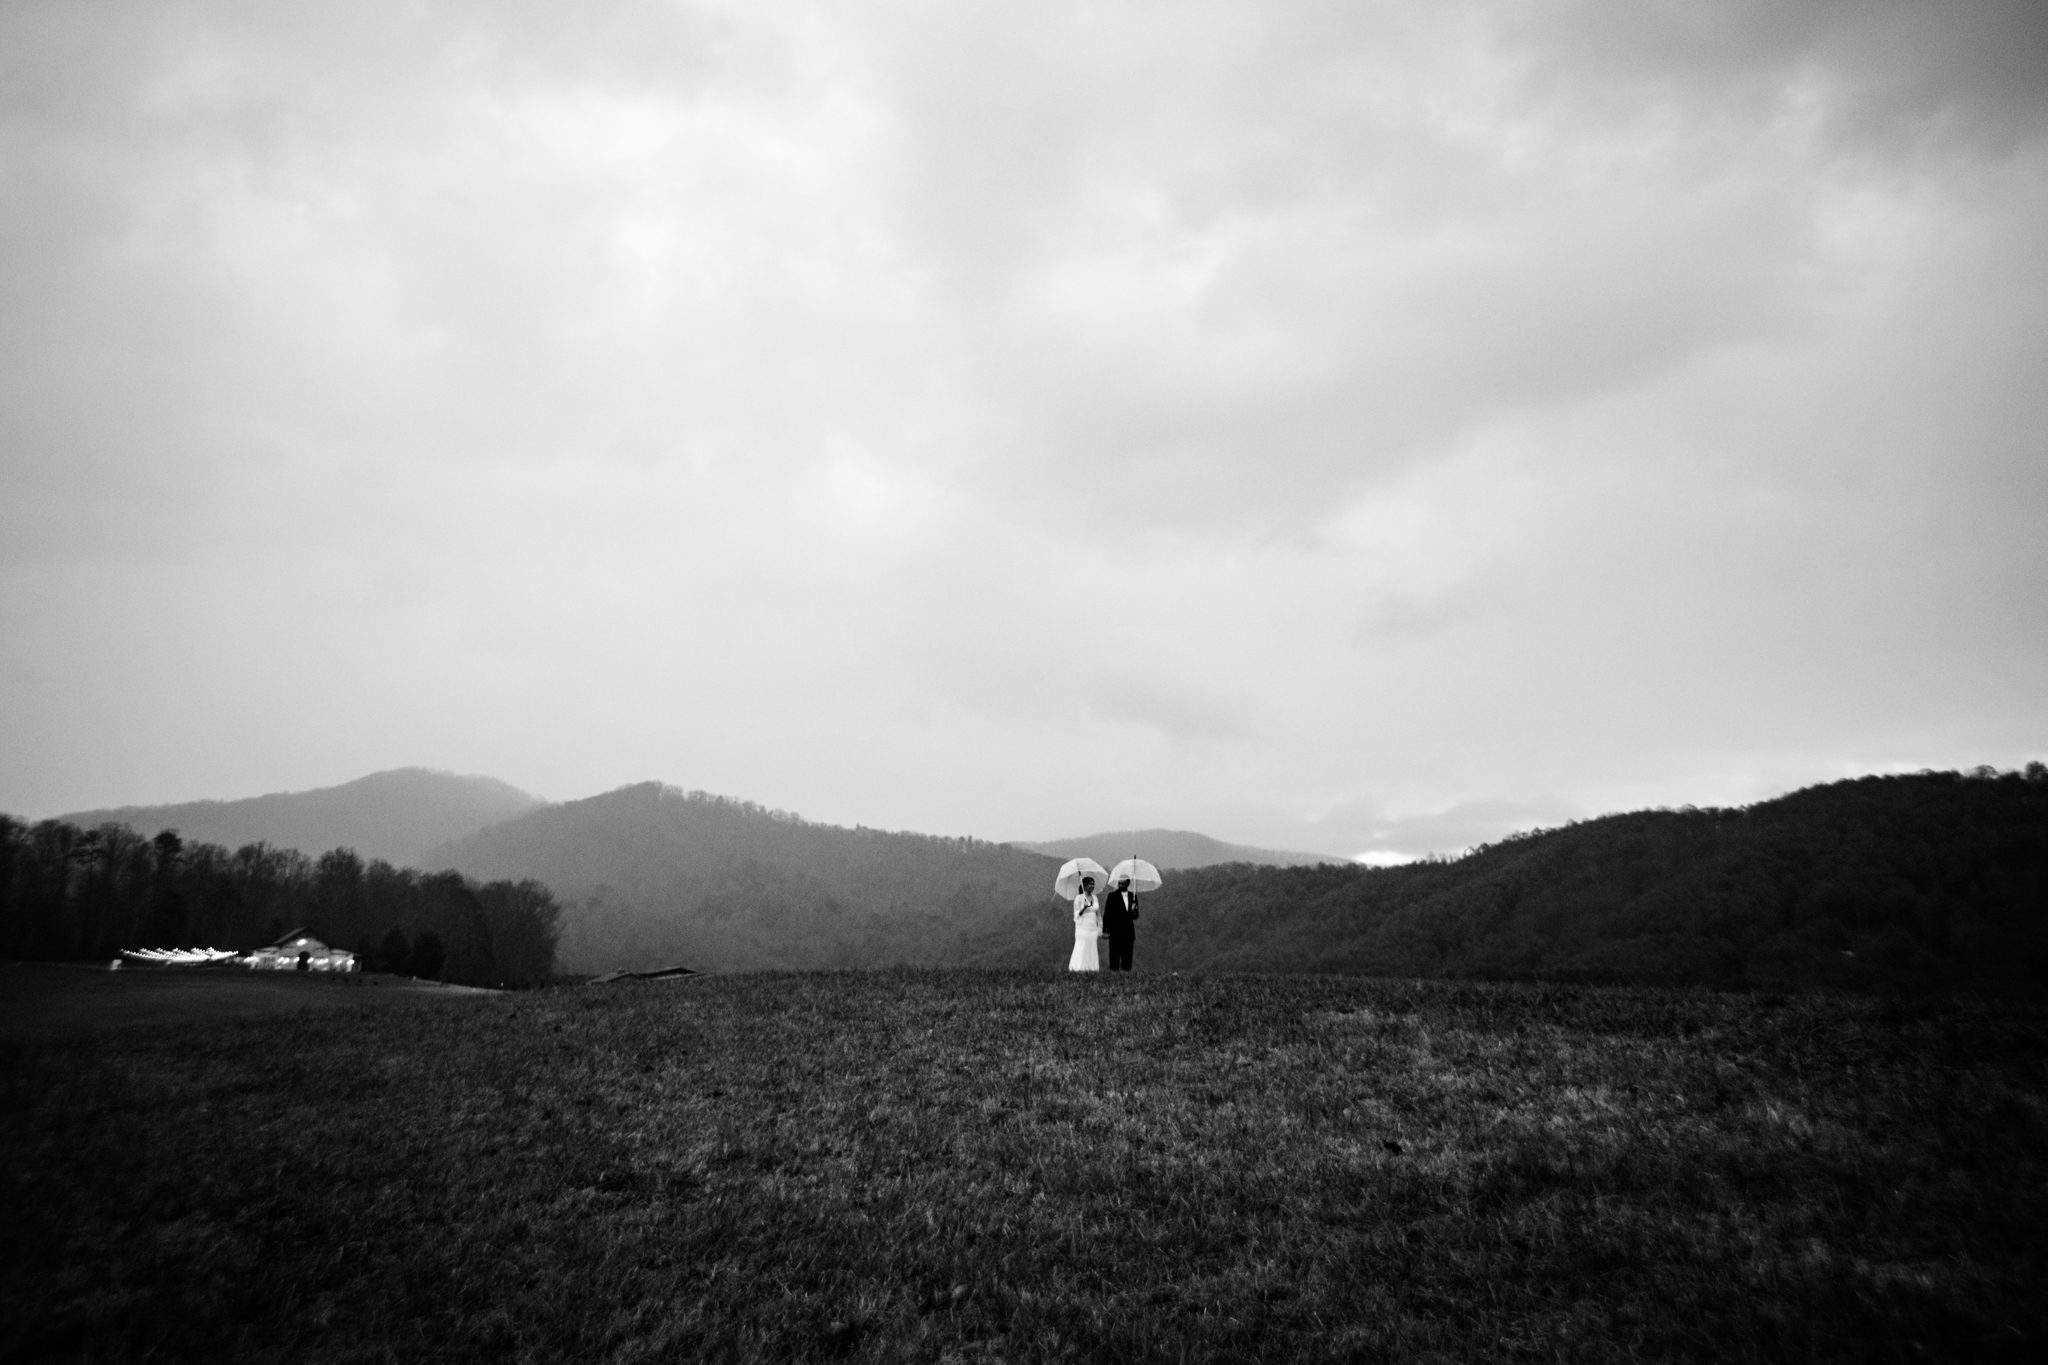 sunset and twlight creative wedding portraits with mountains in the background